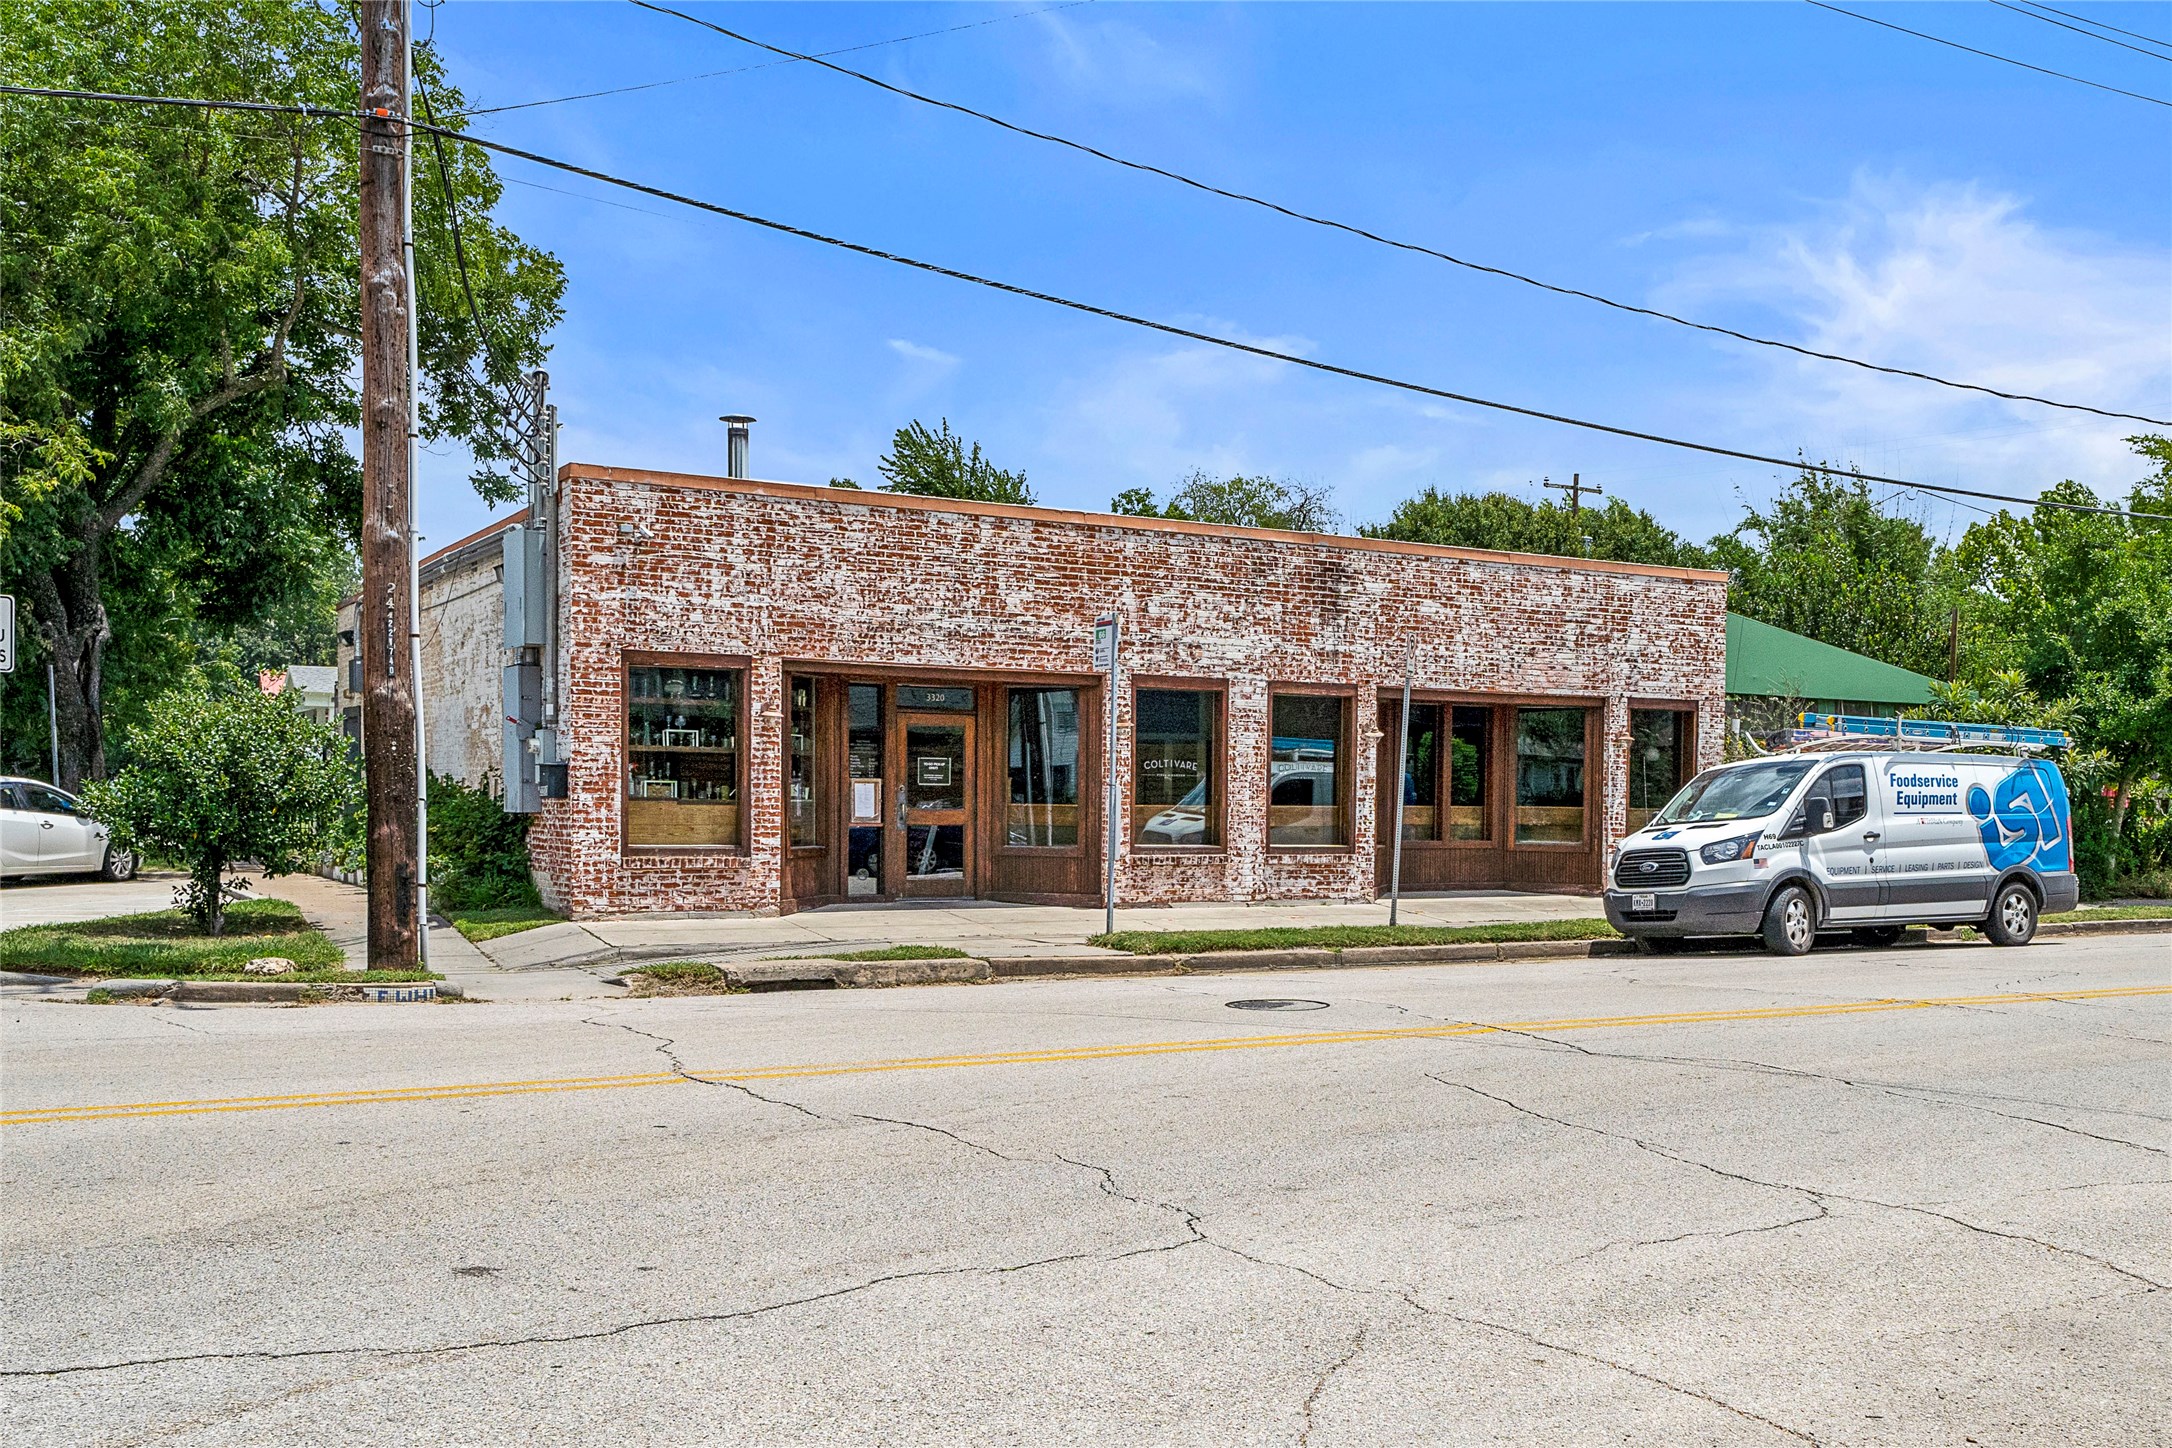 With only 2.2 miles away taking no more than a 7-8 minute drive from your home, visit Coltivare Pizza and Garden to enjoy wood-fired Italian pizzas. - If you have additional questions regarding 1521 Laird Street  in Houston or would like to tour the property with us call 800-660-1022 and reference MLS# 20251638.